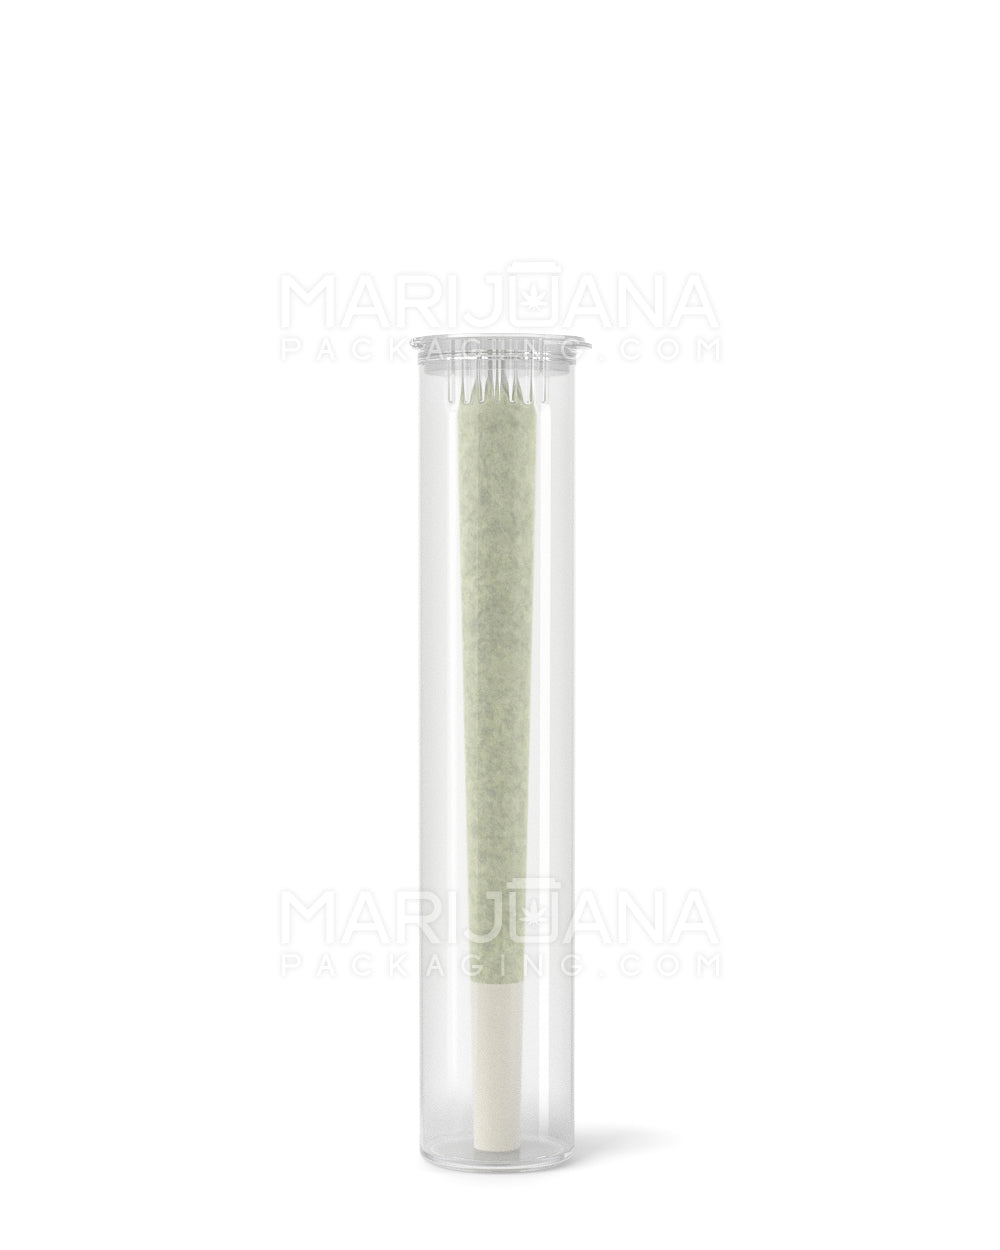 Joint Tube Doob Tube with Pop Top - 98mm - WHITE - LDPE Plastic